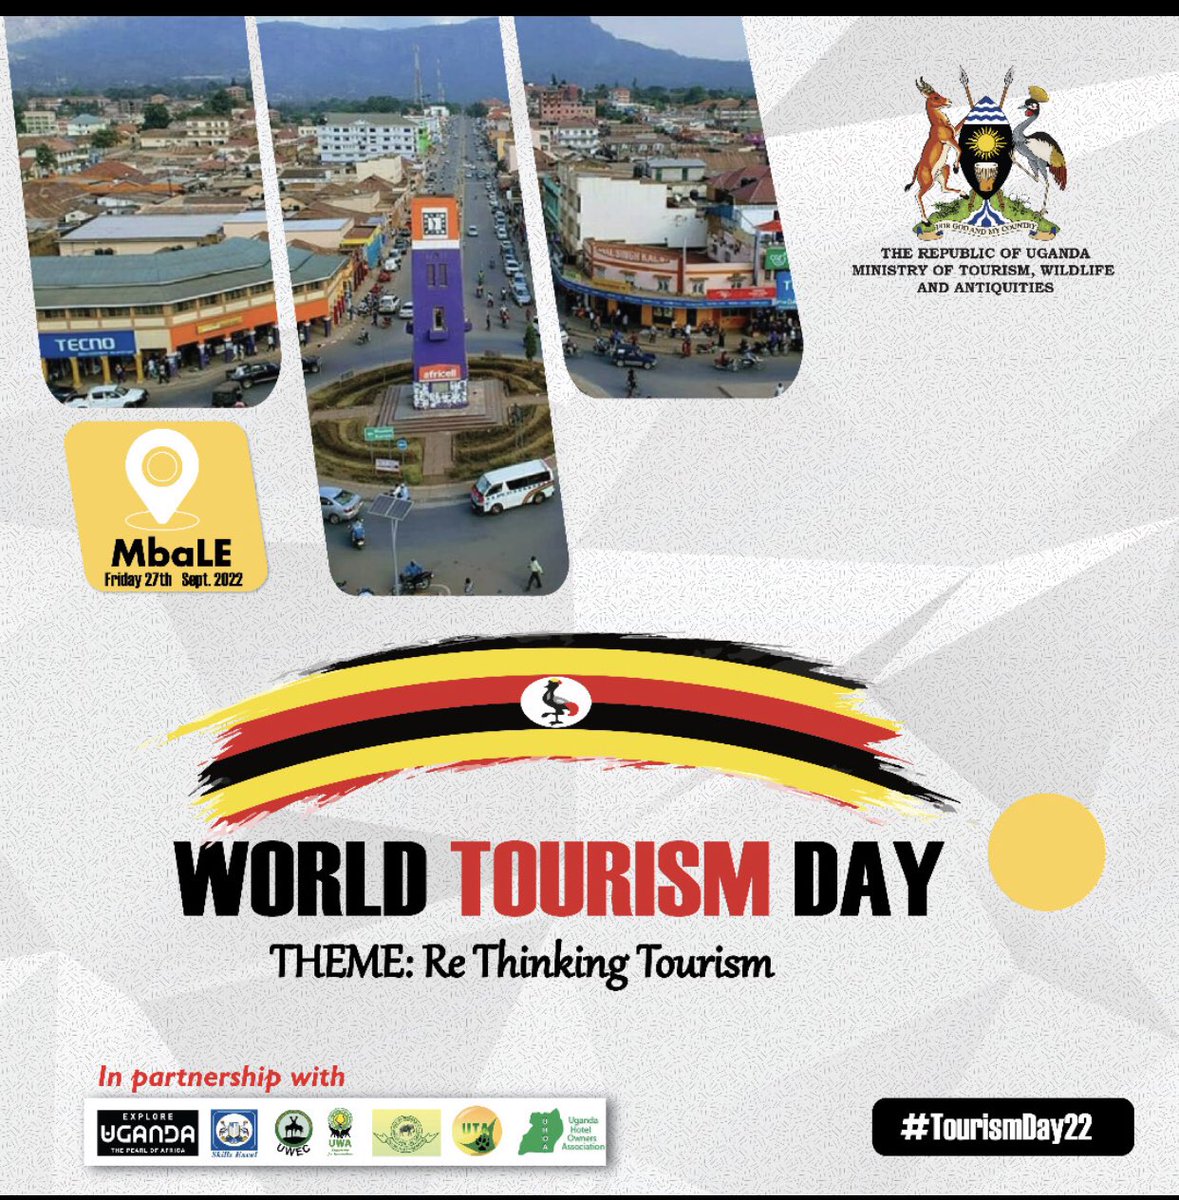 Did you know Mbale city lies at the Western foot of mount Elgon which is an extinct volcano (4,321 metres) 

Don’t miss the #TourismDay22 celebrations in September to explore the city. 

#ExploreUganda #TulambuleWild #UniquelyOurs #Mbale #travel #trip #tourism #mountains